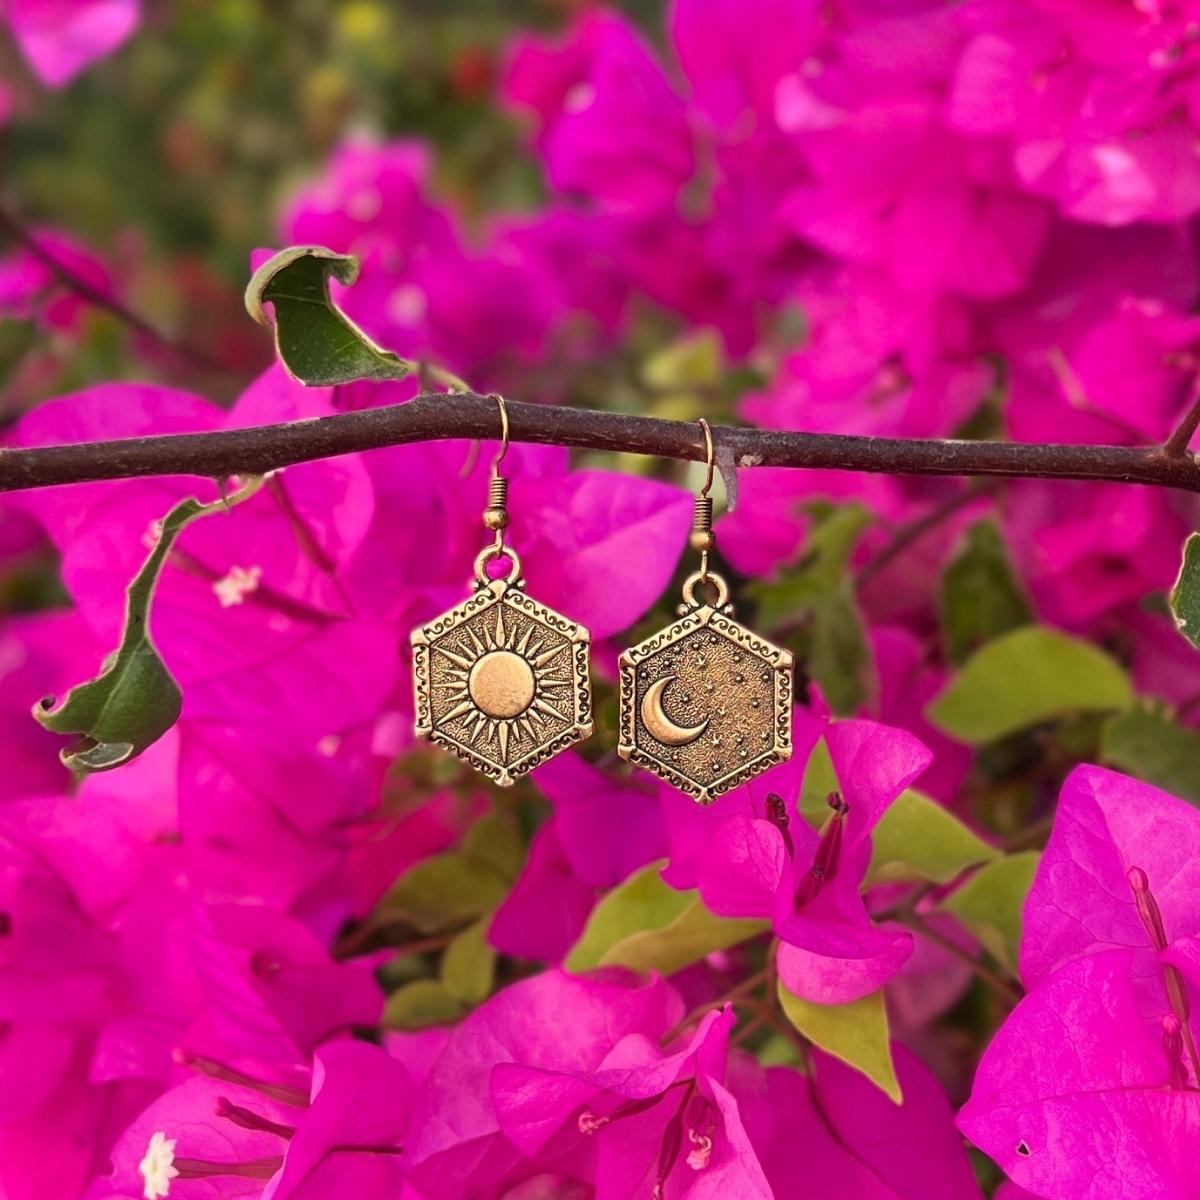 This Celestial Balance Necklace and Earrings are crafted with love and intention for those who seek balance, harmony, and connection with the universe.